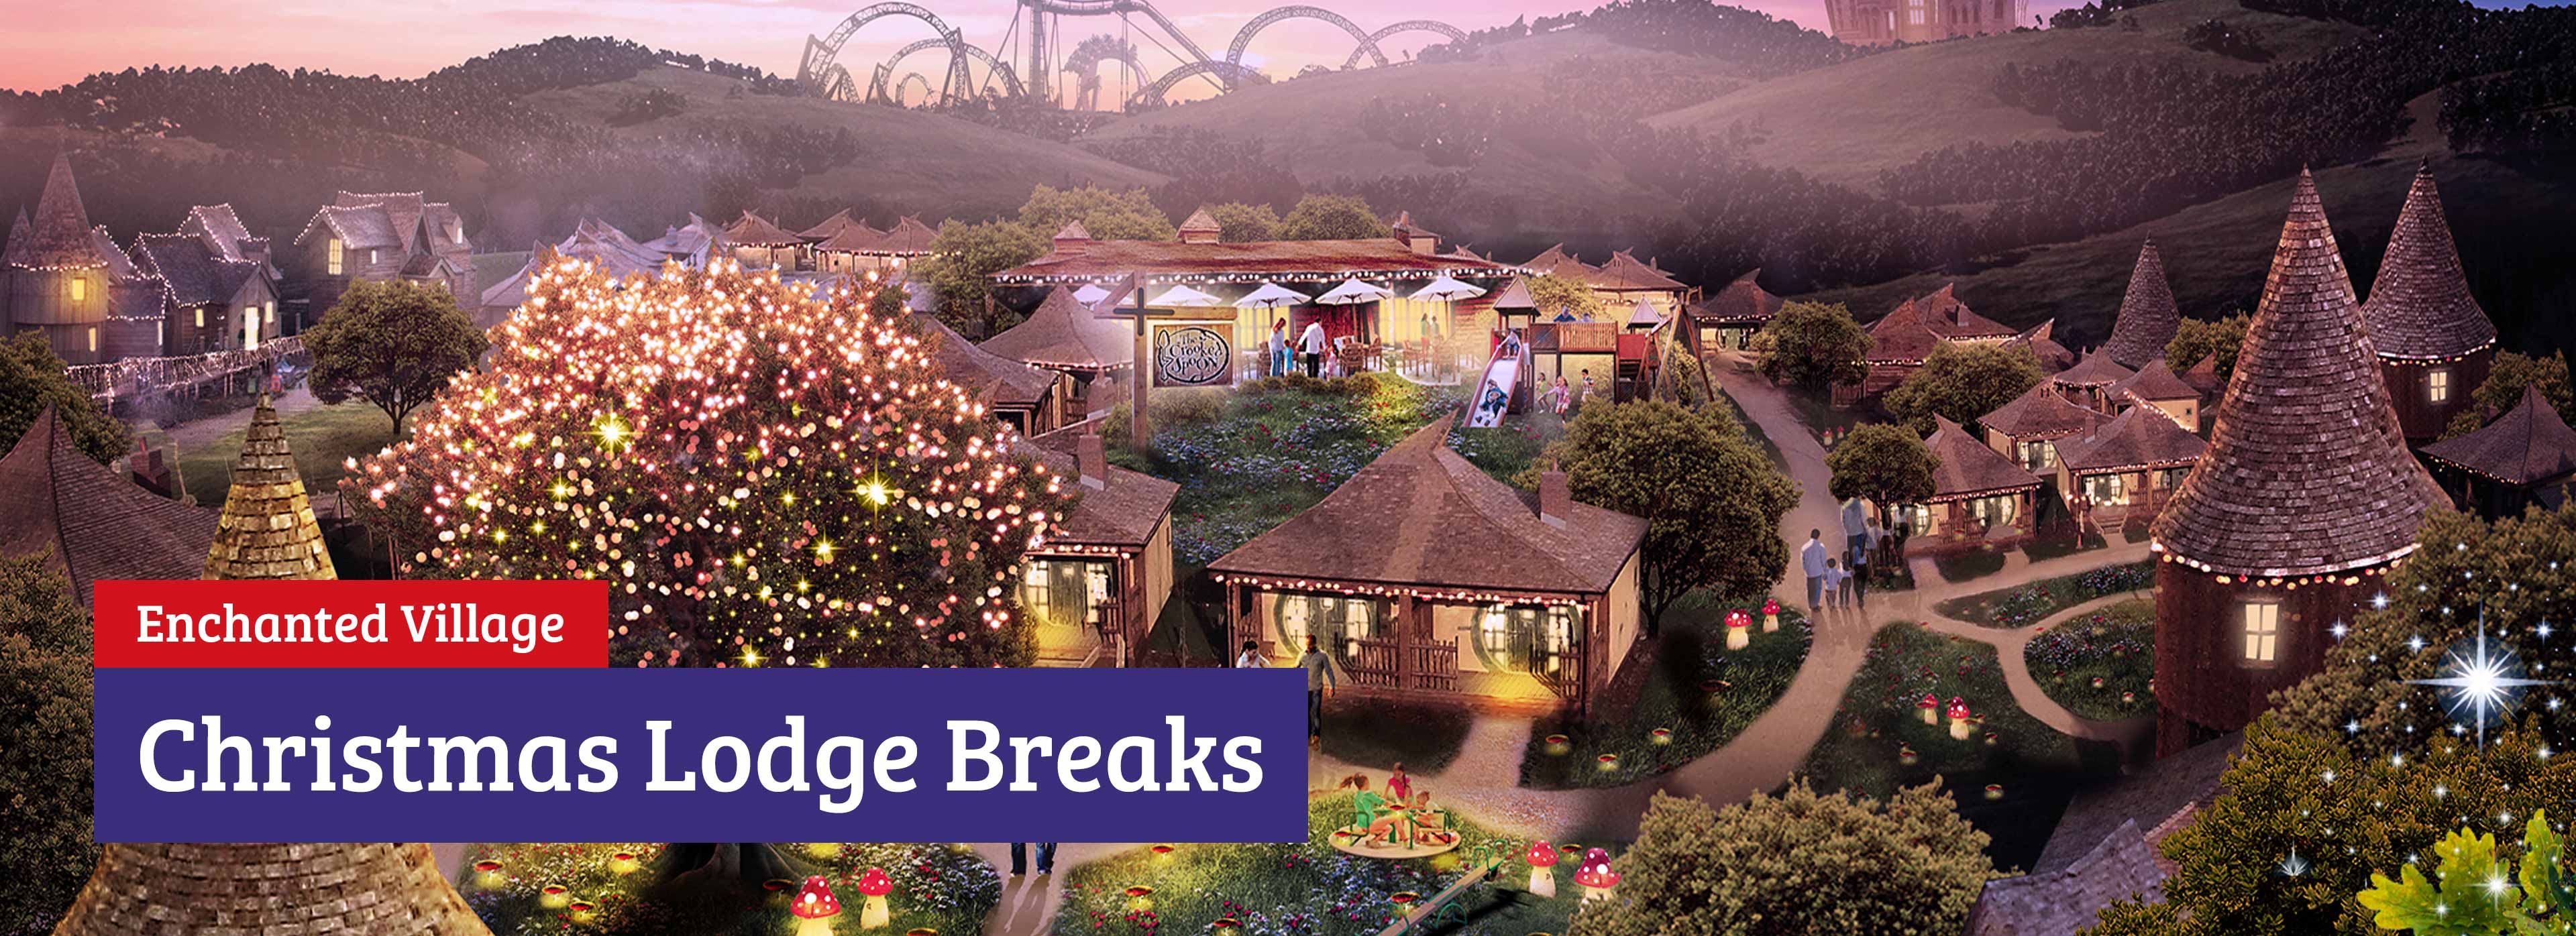 Christmas Lodge Breaks at the Alton Towers Resort